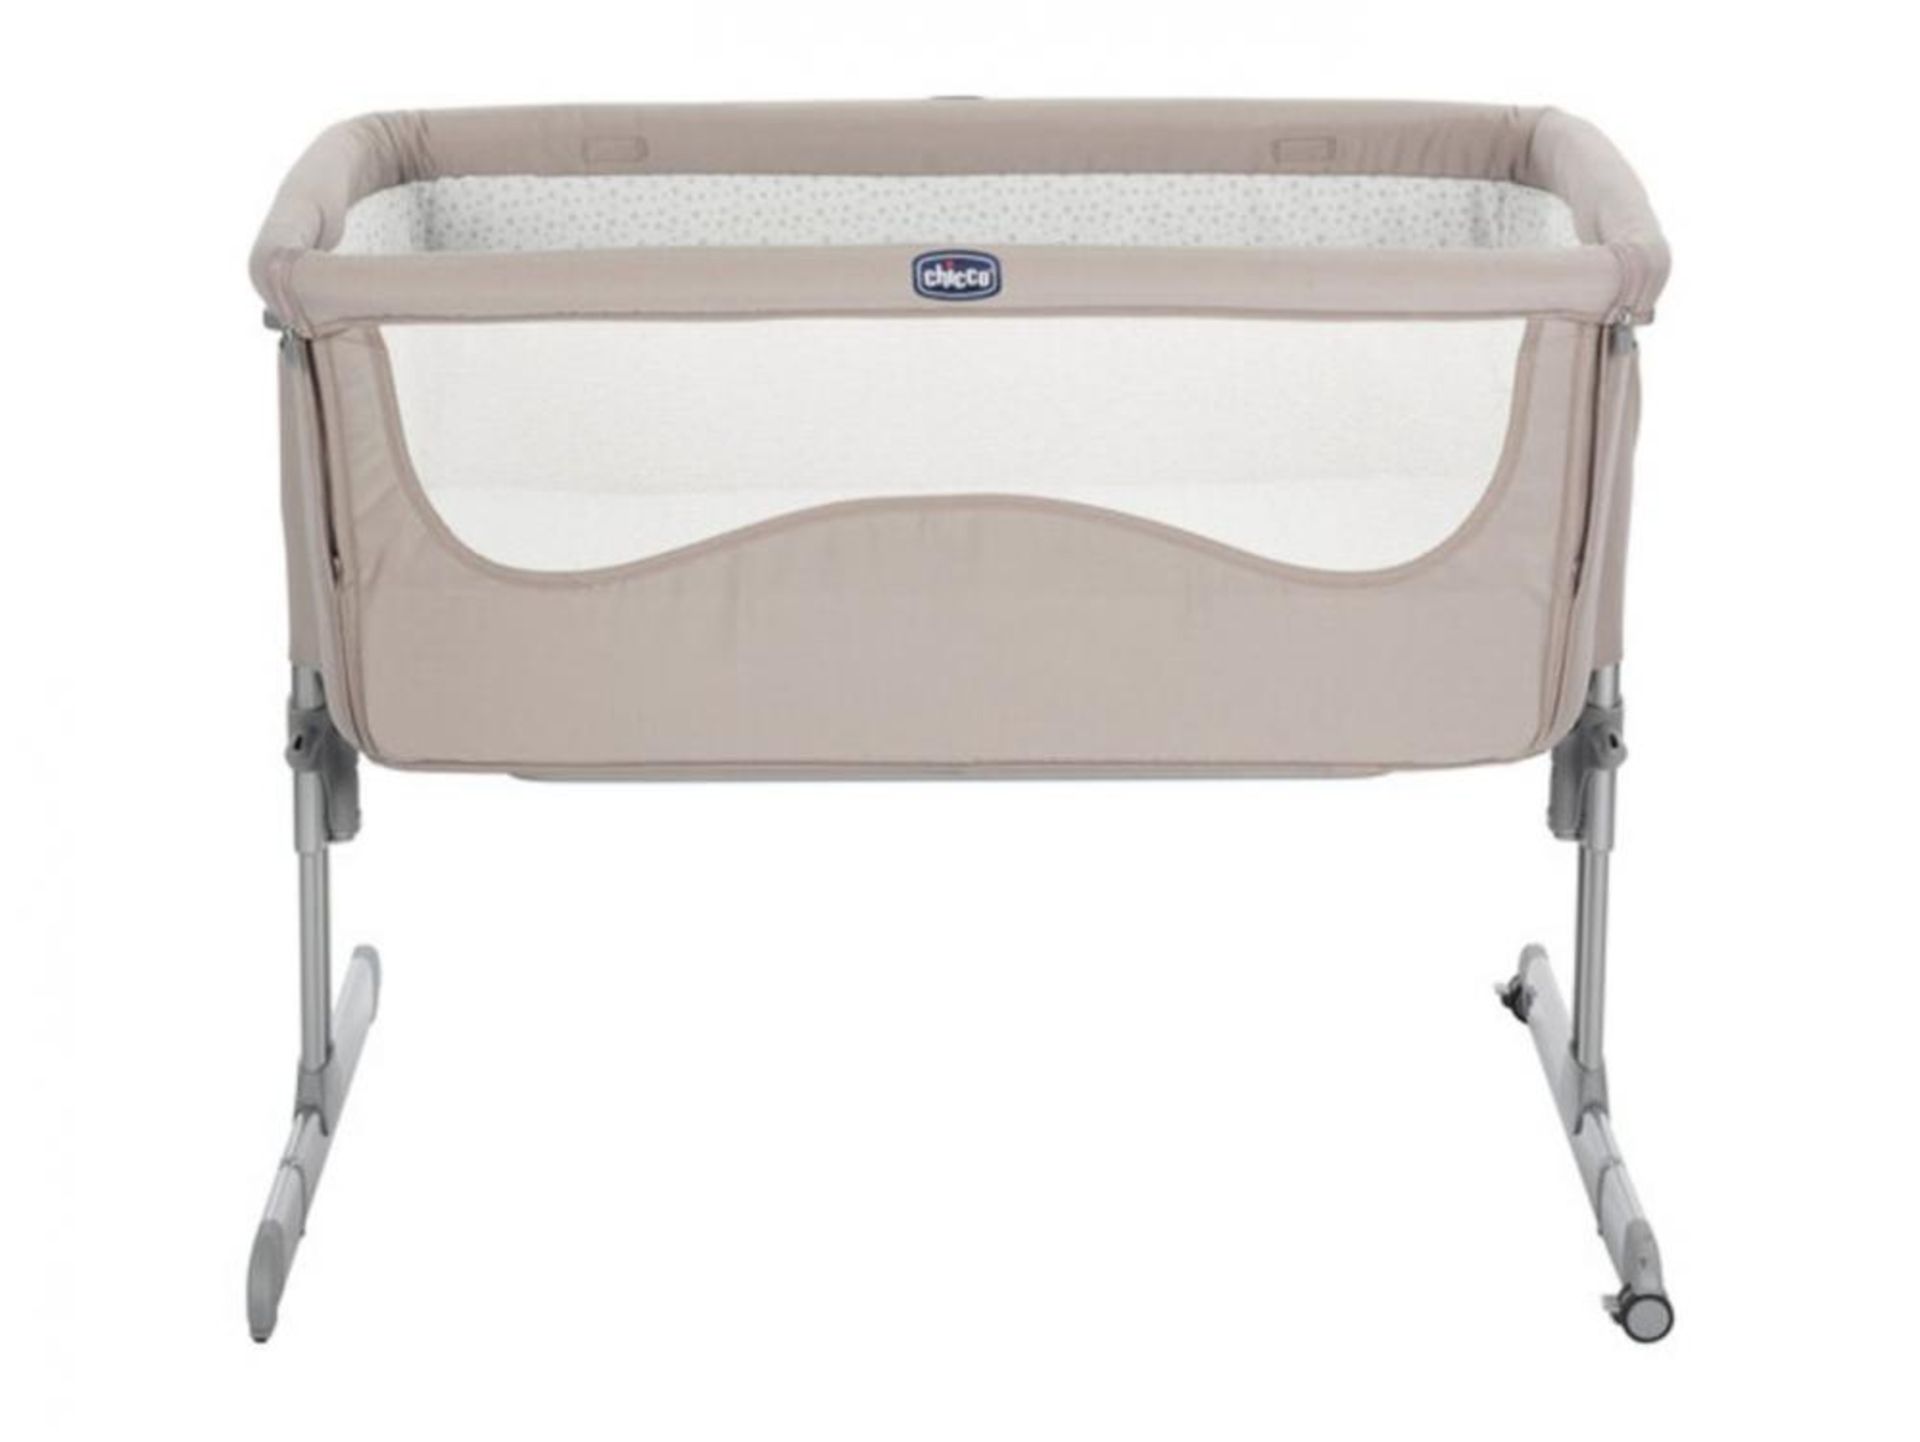 1 x Chicco Next2me Chick to Chick Bedside Baby Crib - Brand New 2019 Sealed Stock - Includes Mattres - Image 6 of 10